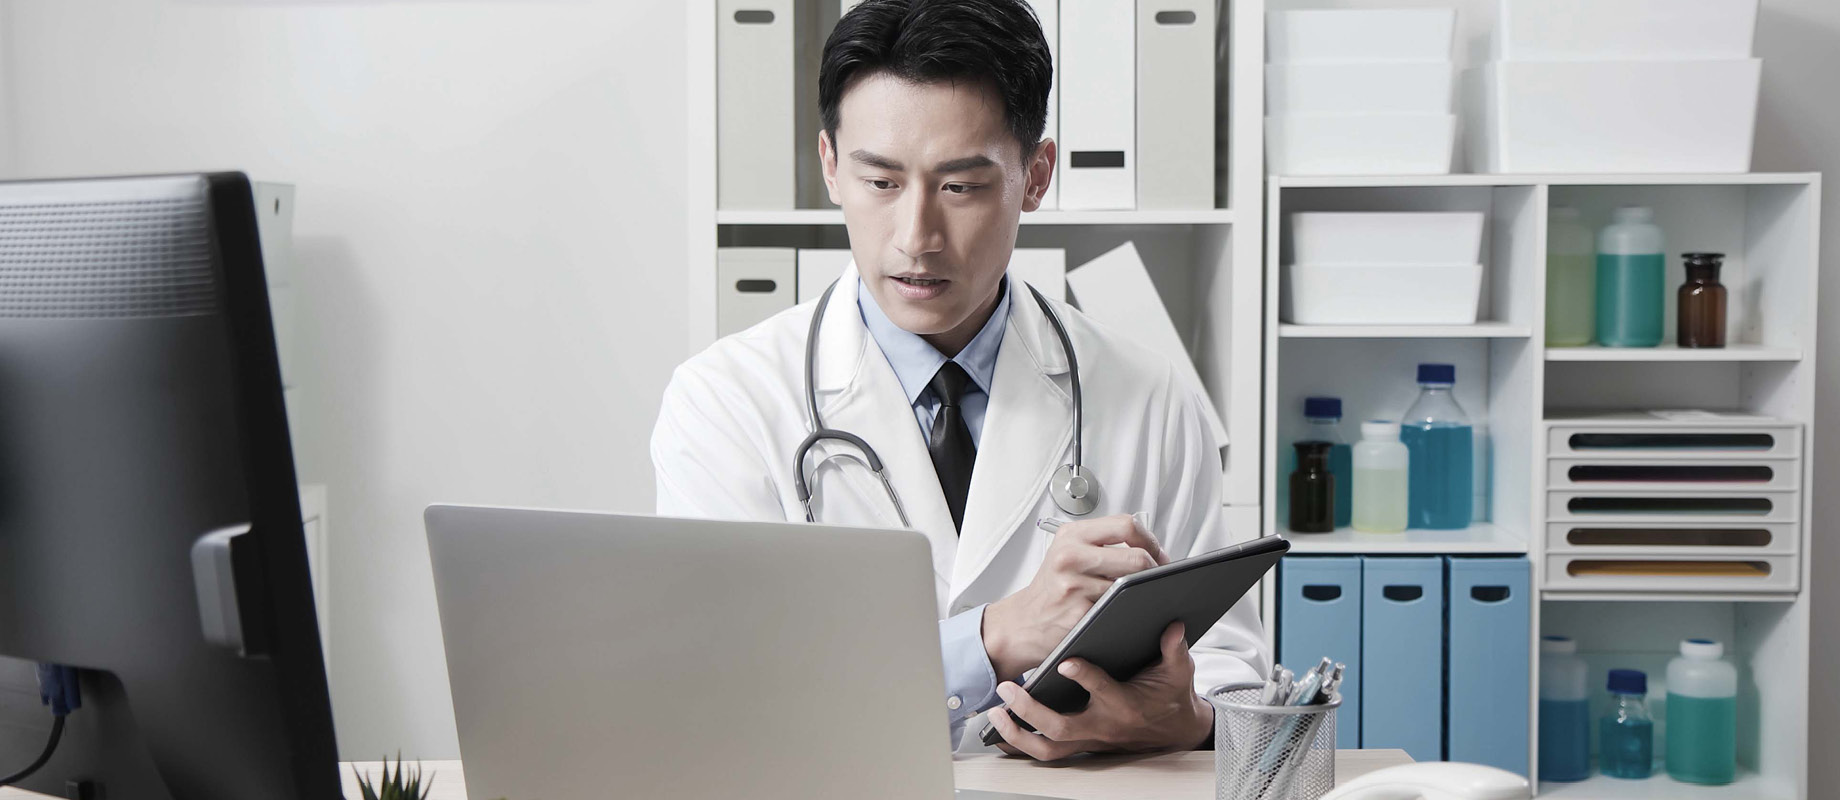 How to Mitigate Telehealth Risks and Create an Action Plan